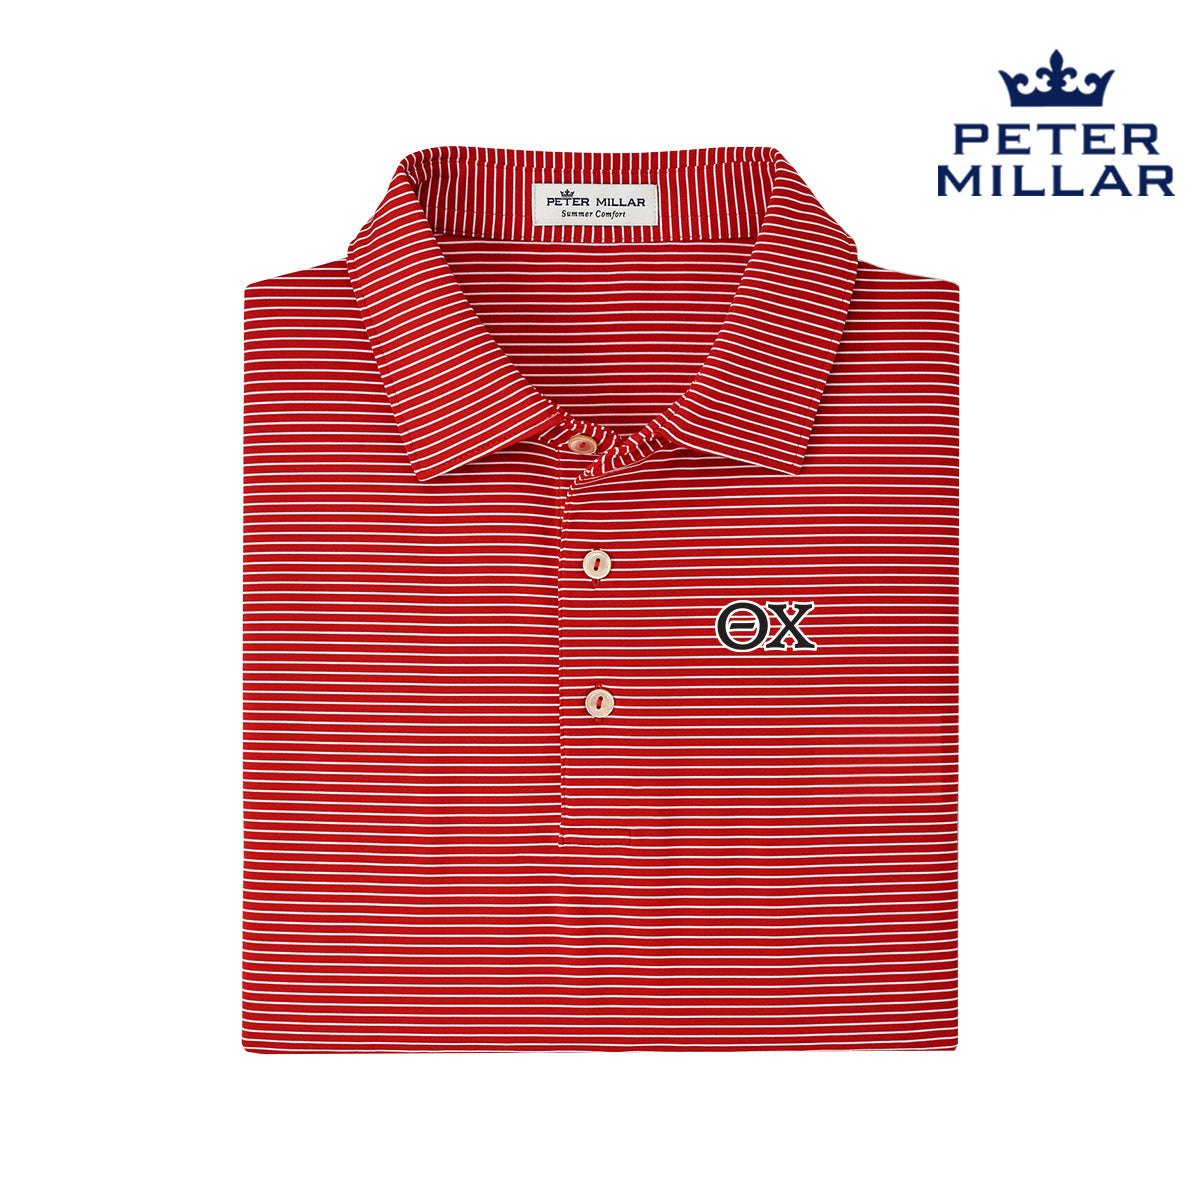 Theta Chi Red Peter Millar Marlin Performance Polo With Greek Letters